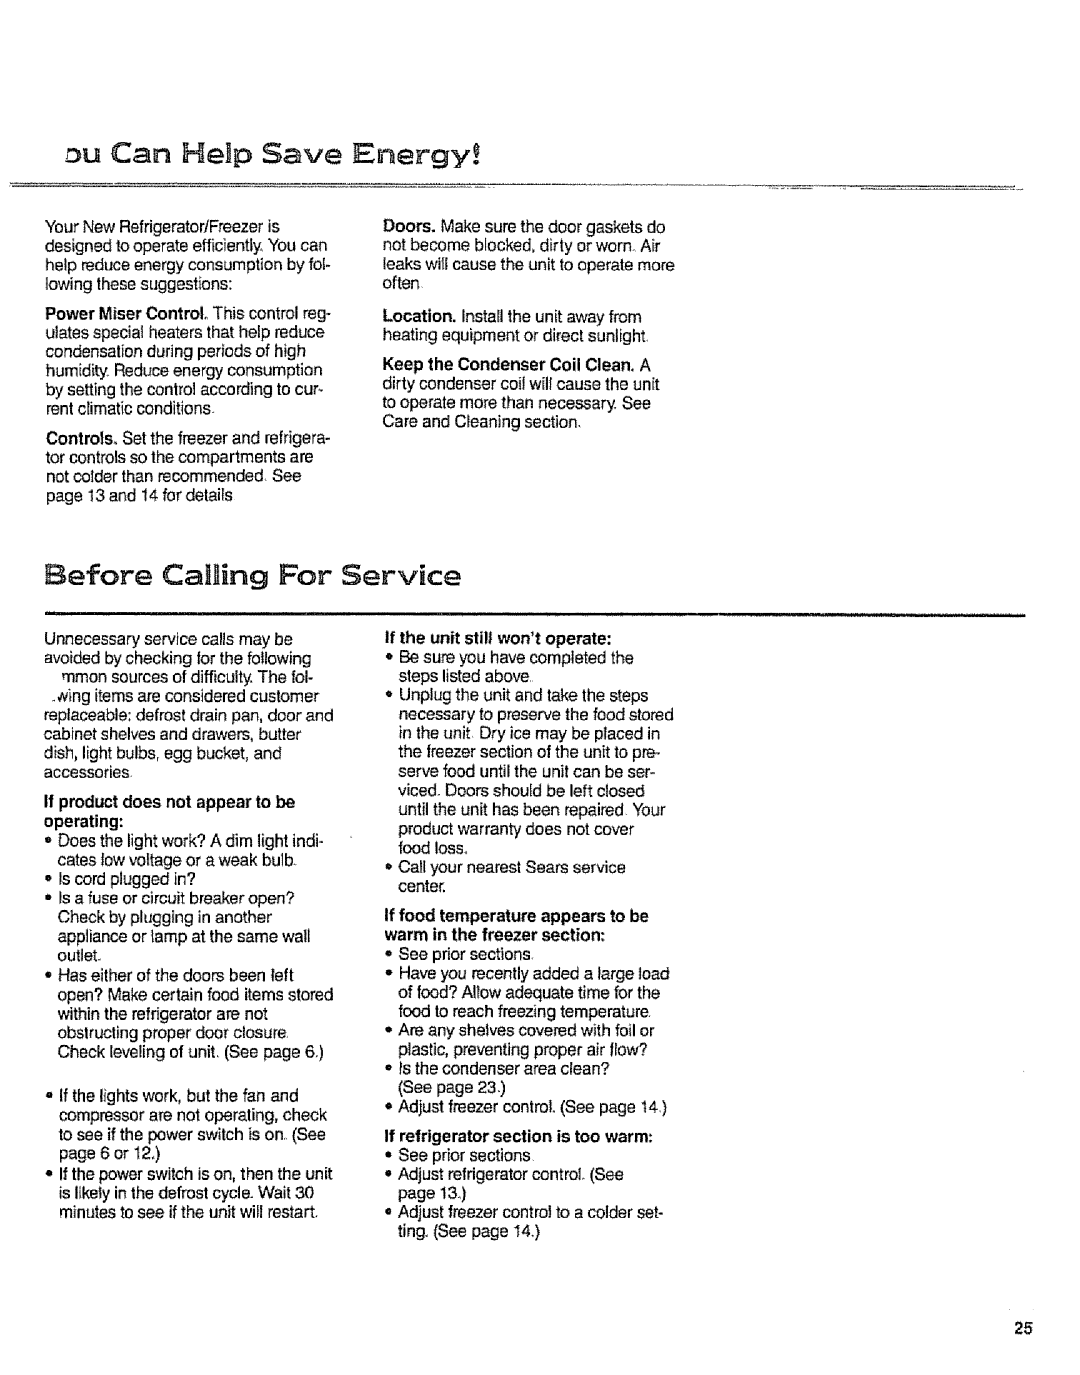 Sears 10062603 manual Before Calling For Service, Can Help Save Energy, operating, If the unit still wontoperate 